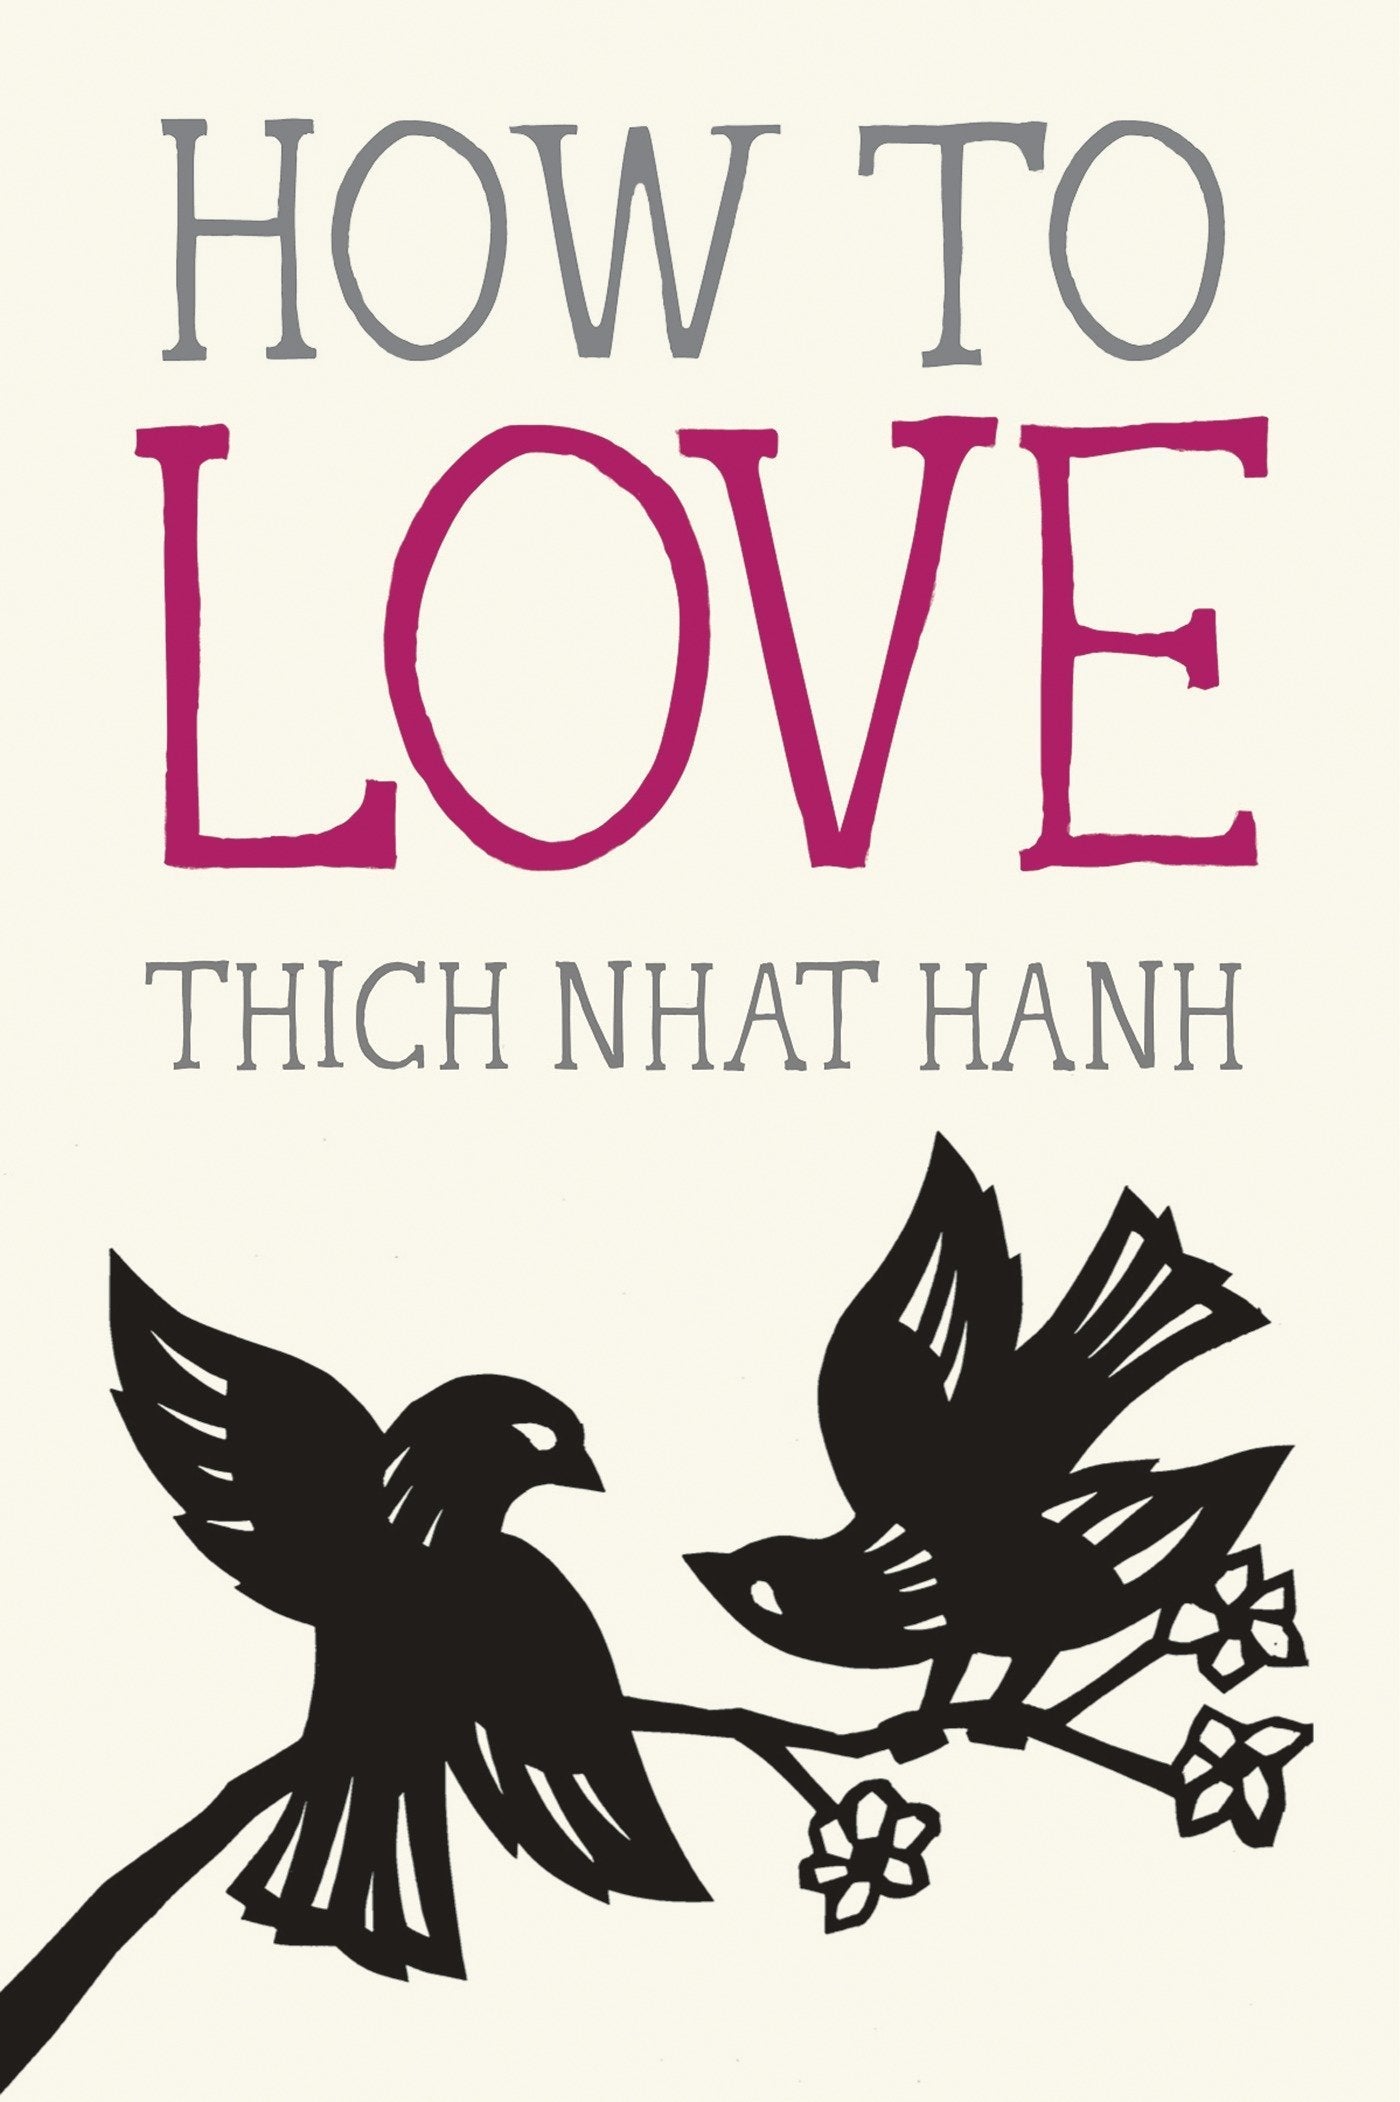 Mindfulness Essentials : How to Love - Thich Nhat Hanh